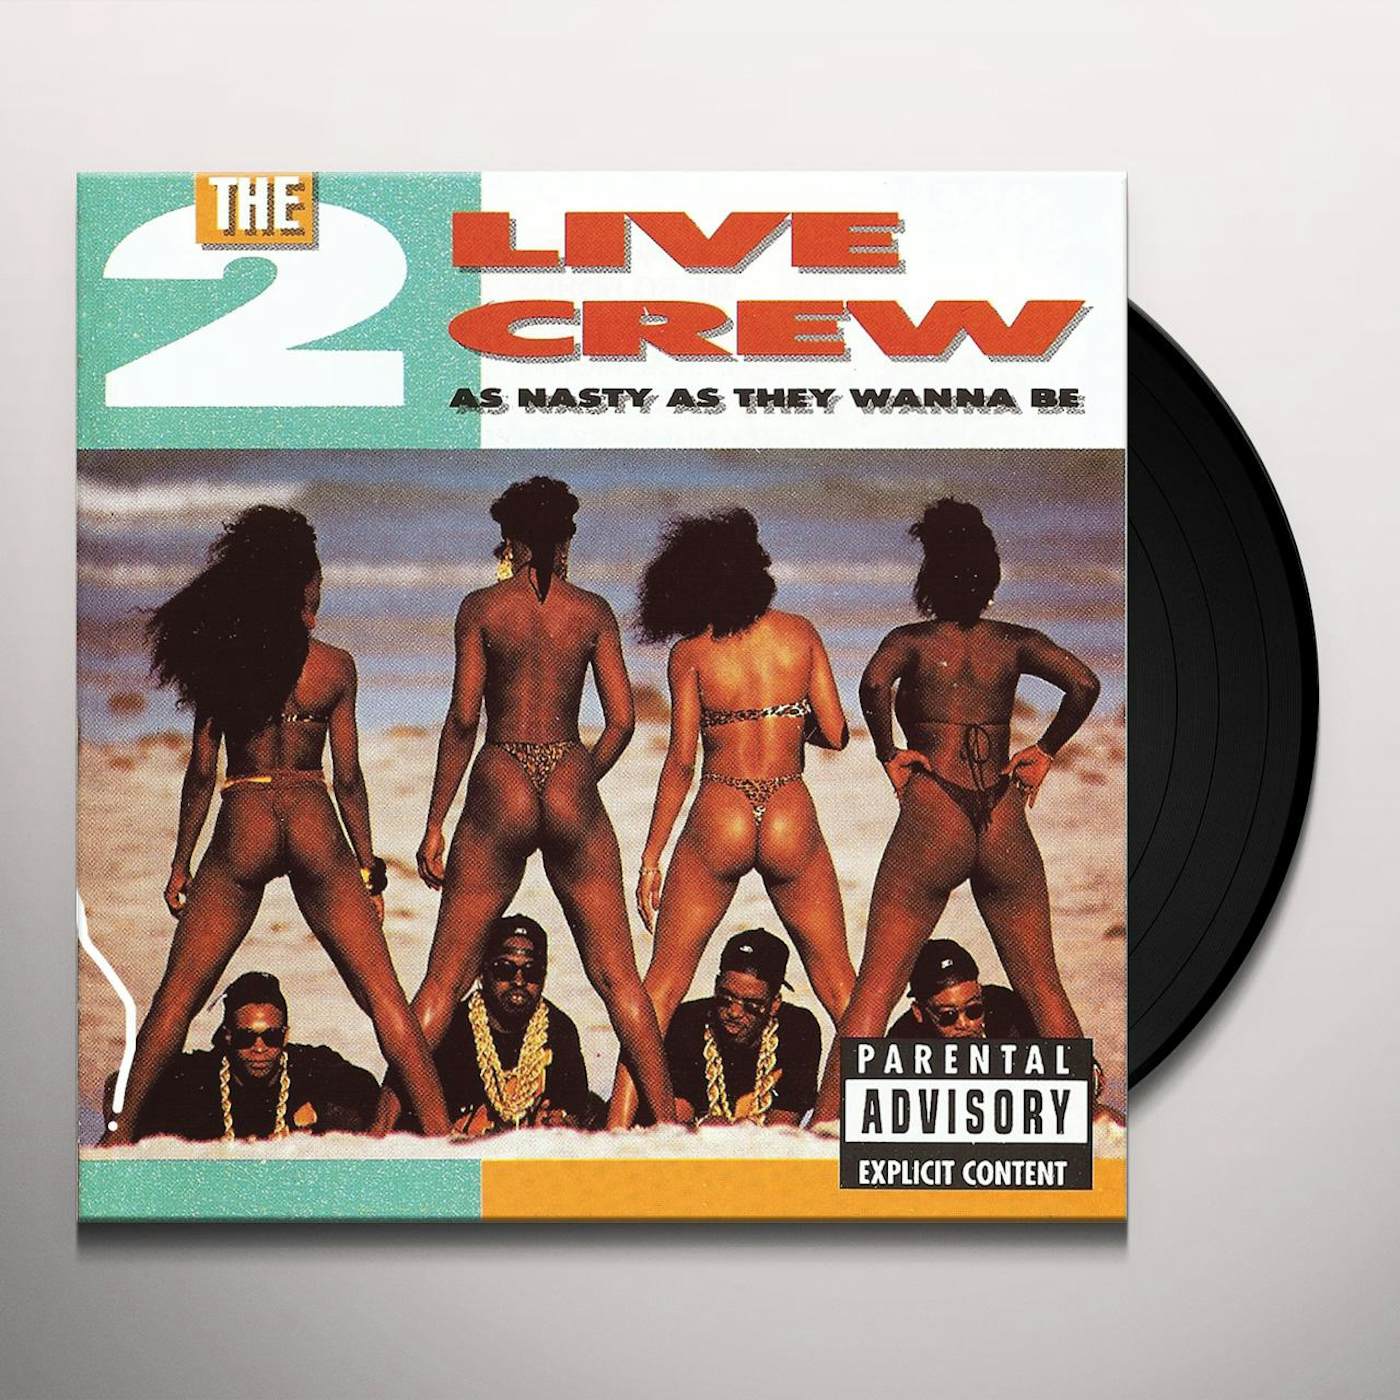 2 LIVE CREW As Nasty As They Wanna Be Vinyl Record